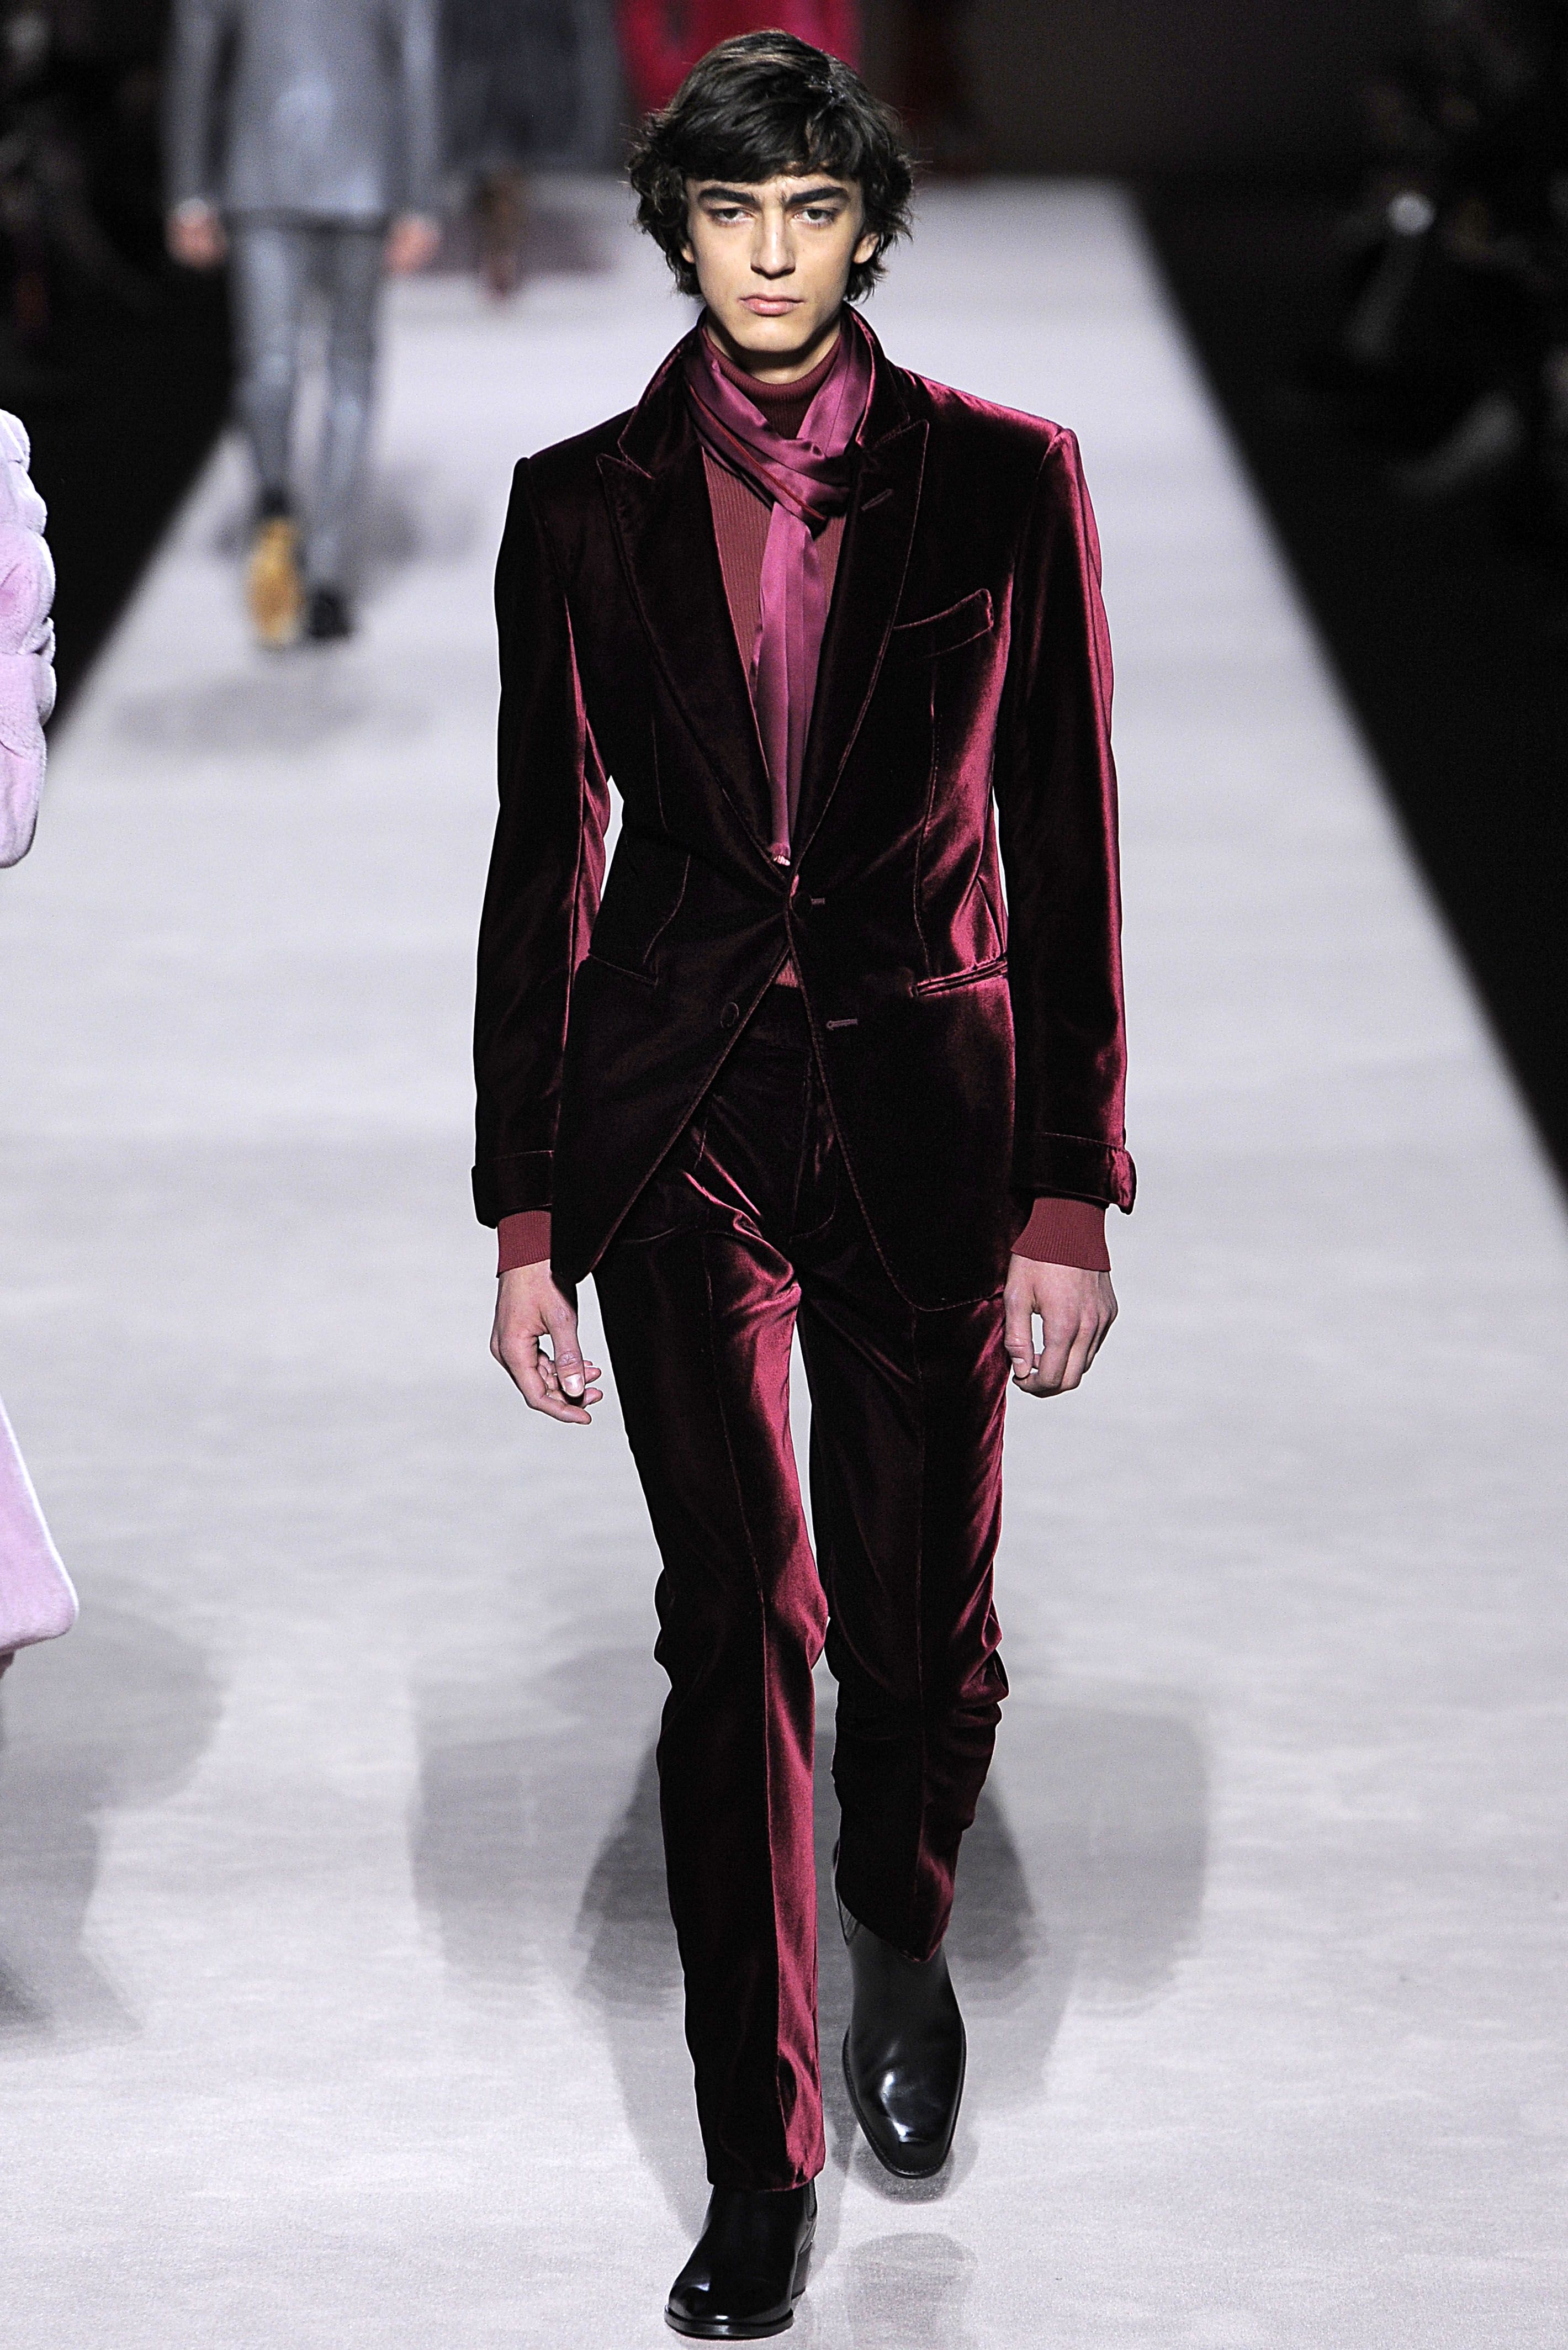 Tom Ford Remakes That Iconic '90s Red Velvet Suit | vlr.eng.br